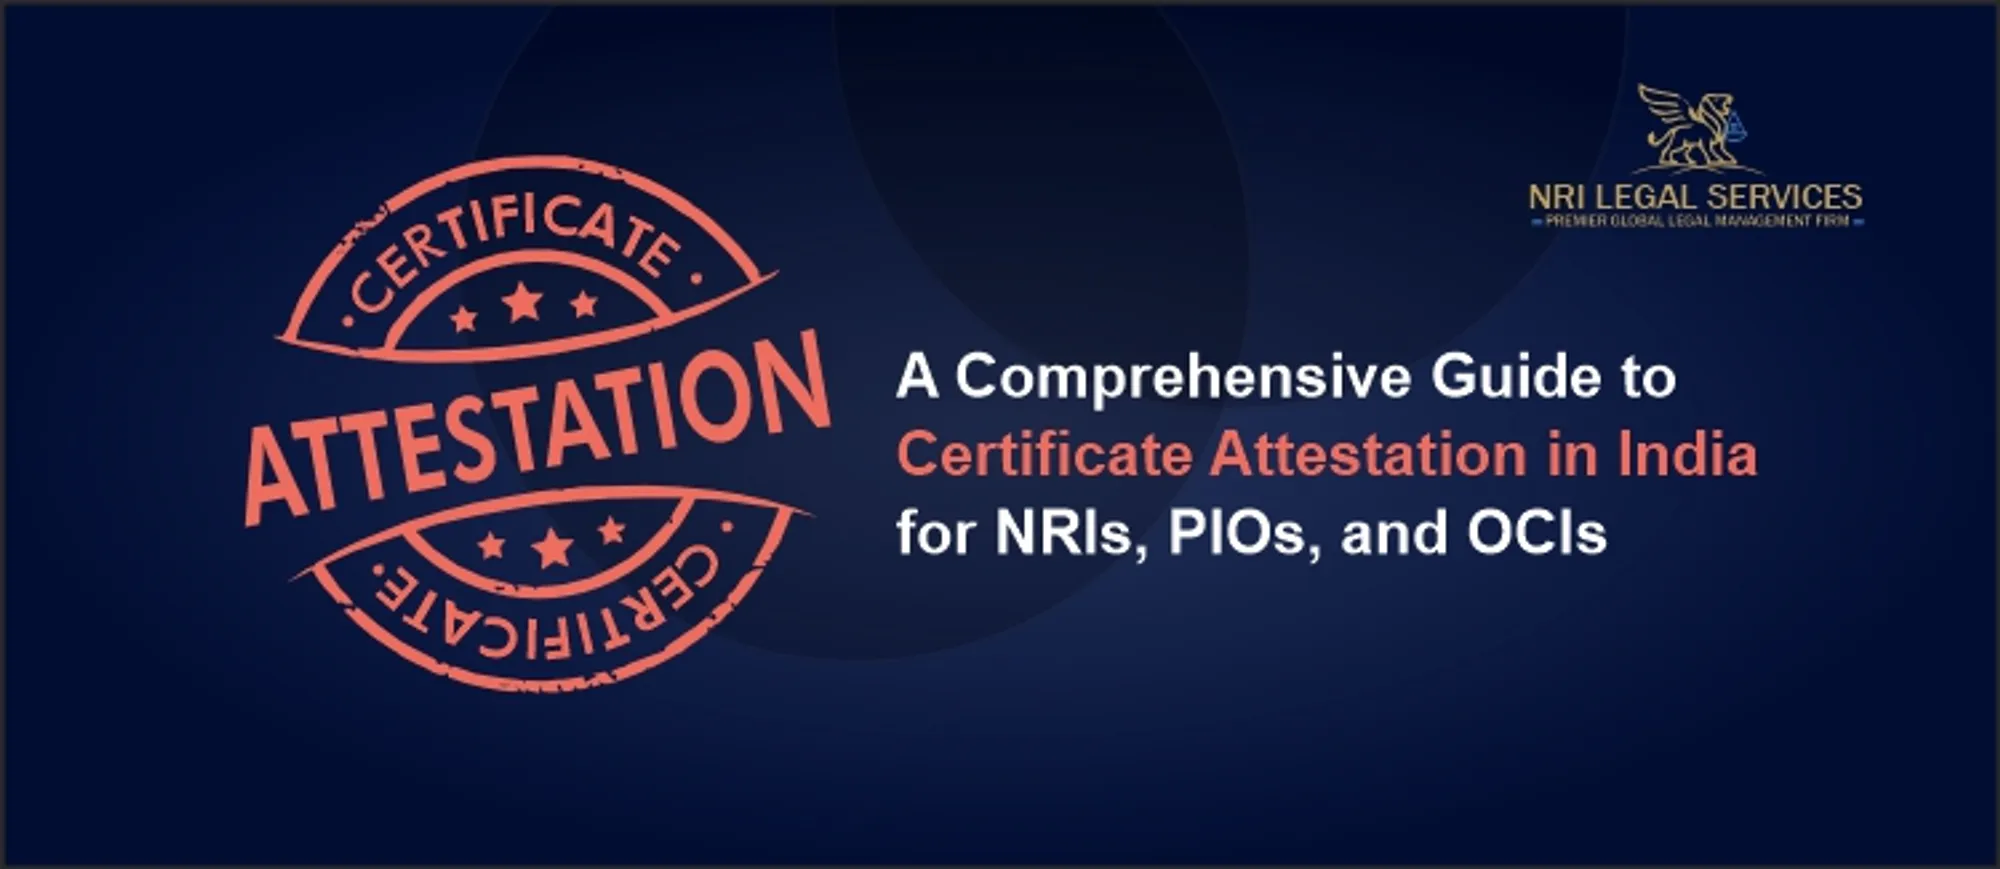 A Comprehensive Guide to Certificate Attestation in India for NRIs, PIOs, and OCIs